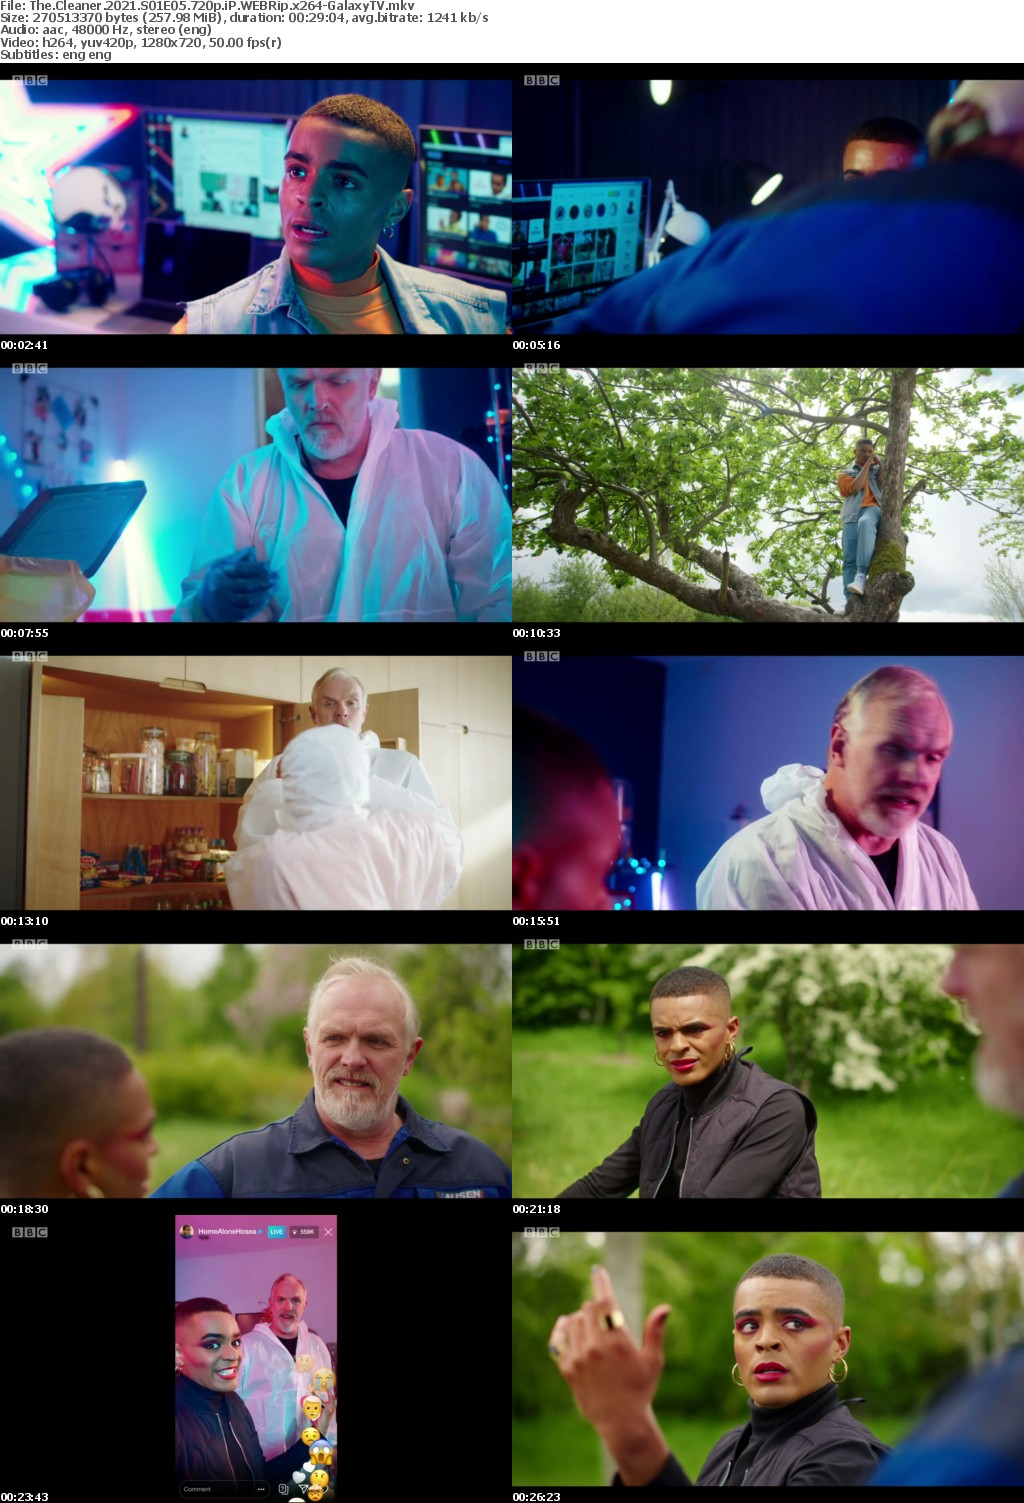 The Cleaner 2021 S01 COMPLETE 720p iP WEBRip x264-GalaxyTV